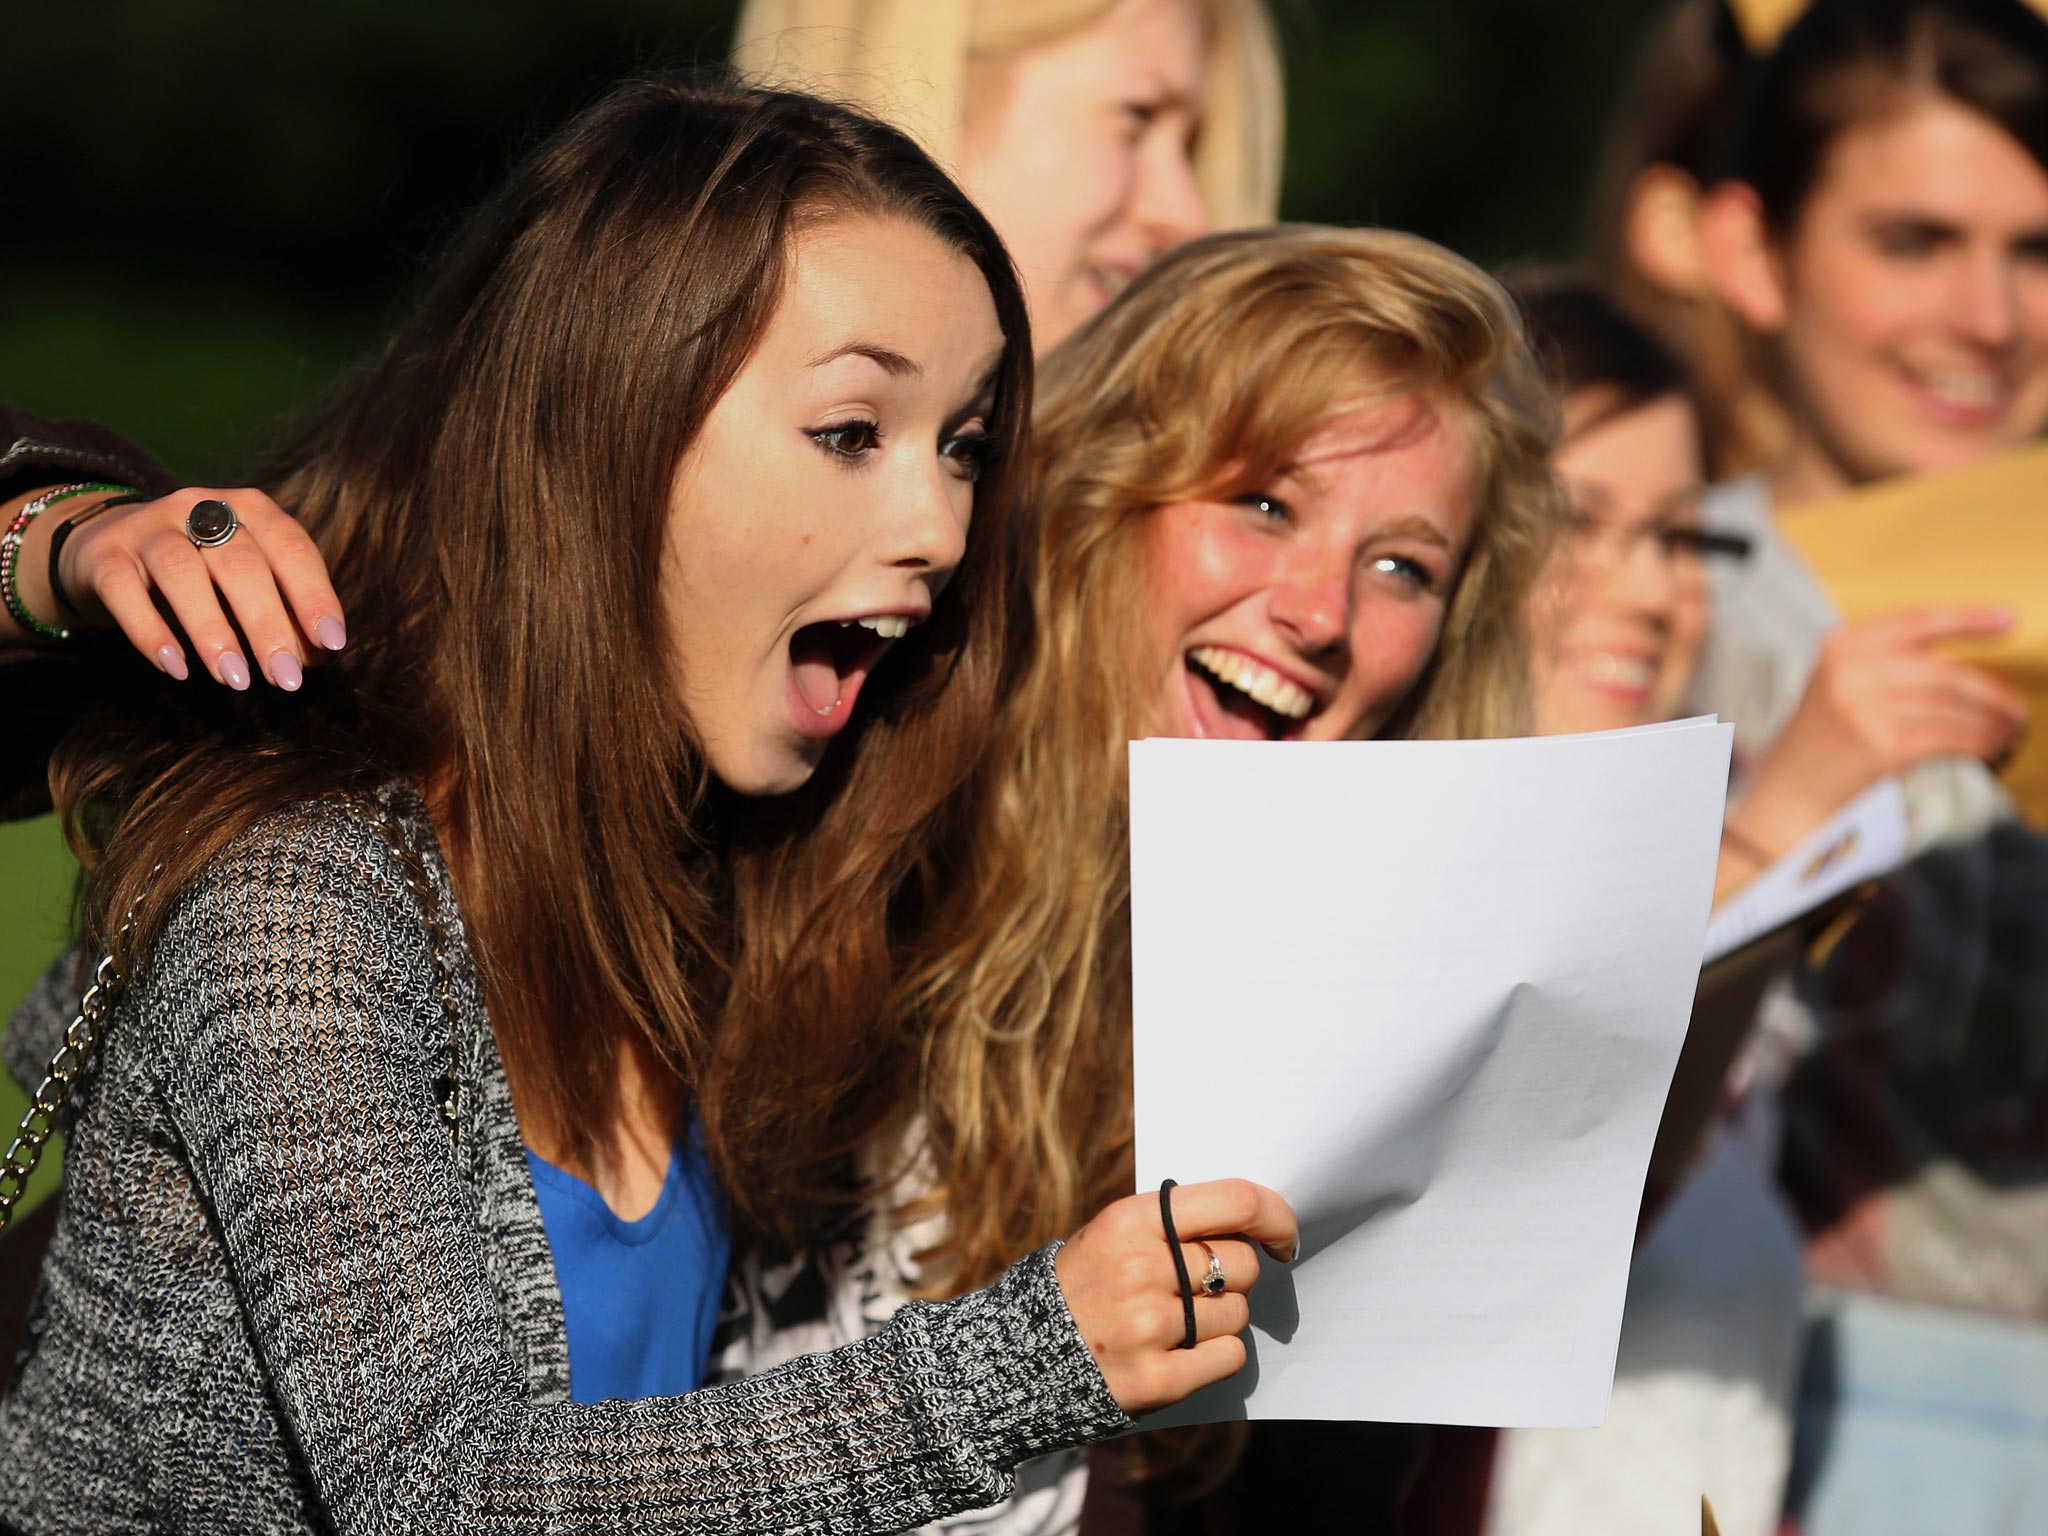 Students throughout the UK receive their A Level results